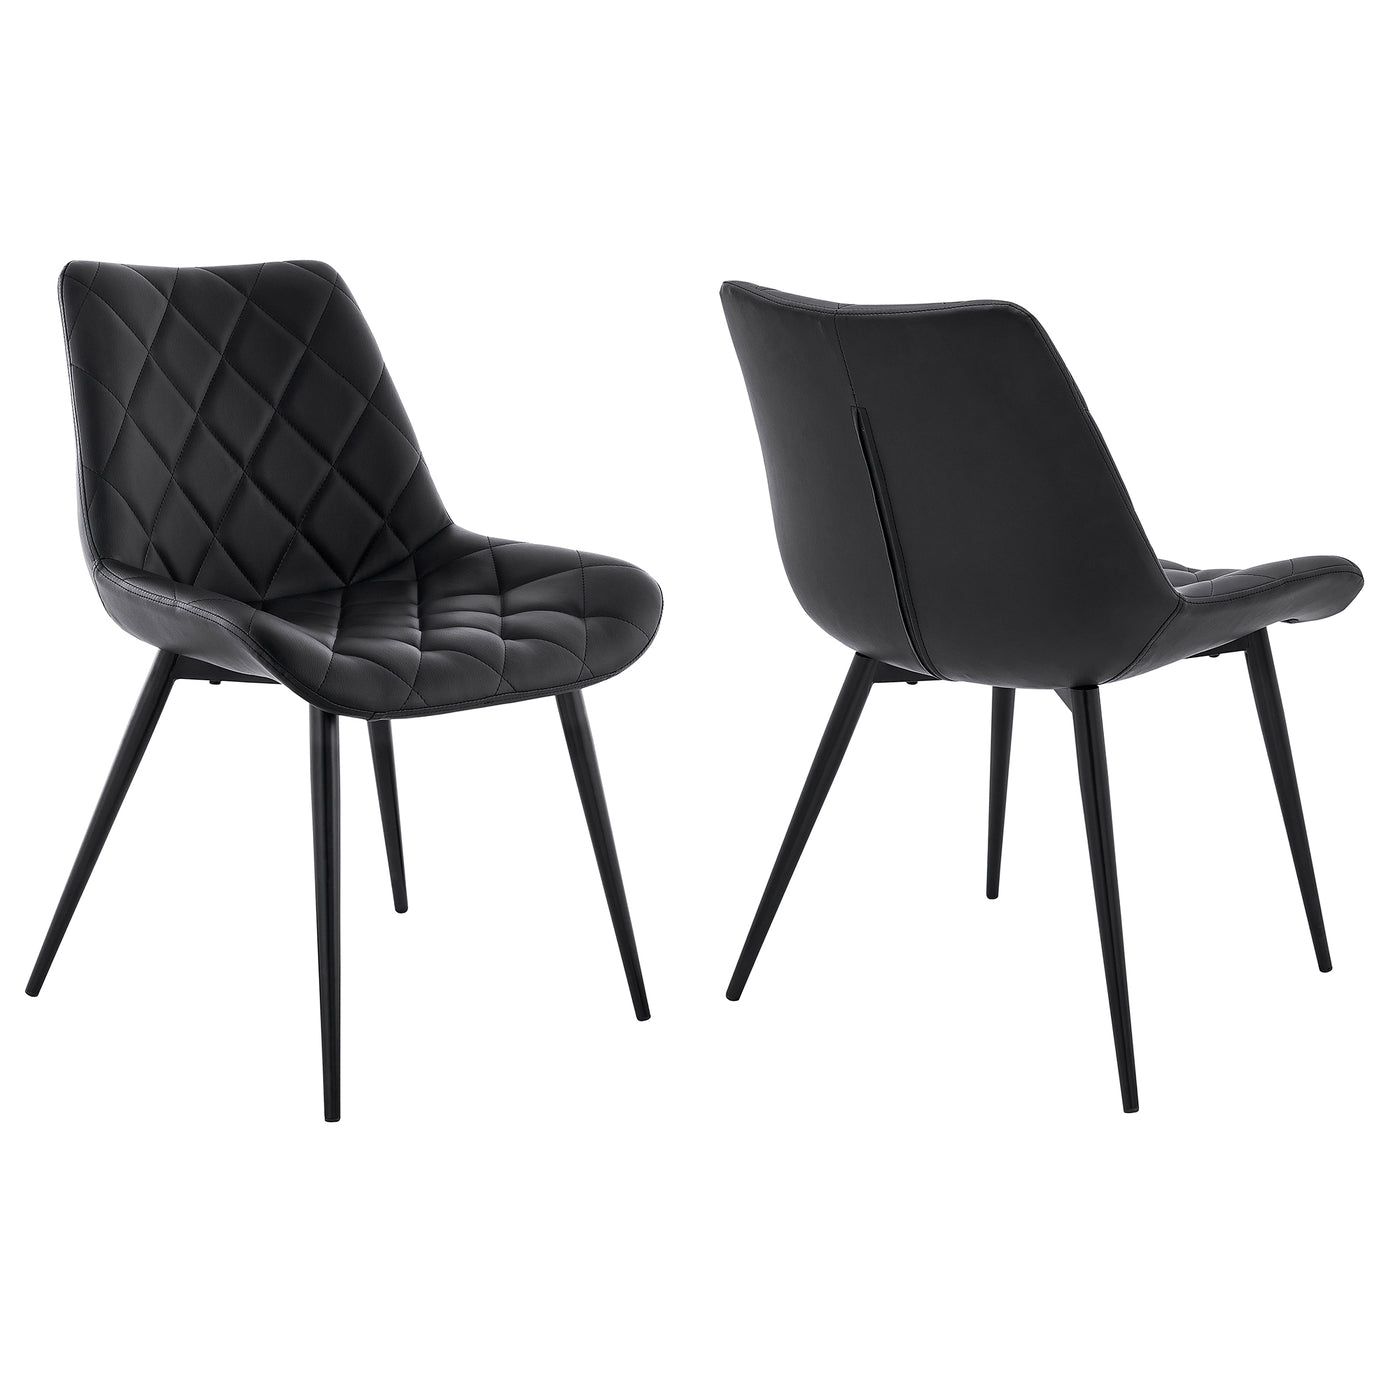 Loralie Dining Chair Set of 2